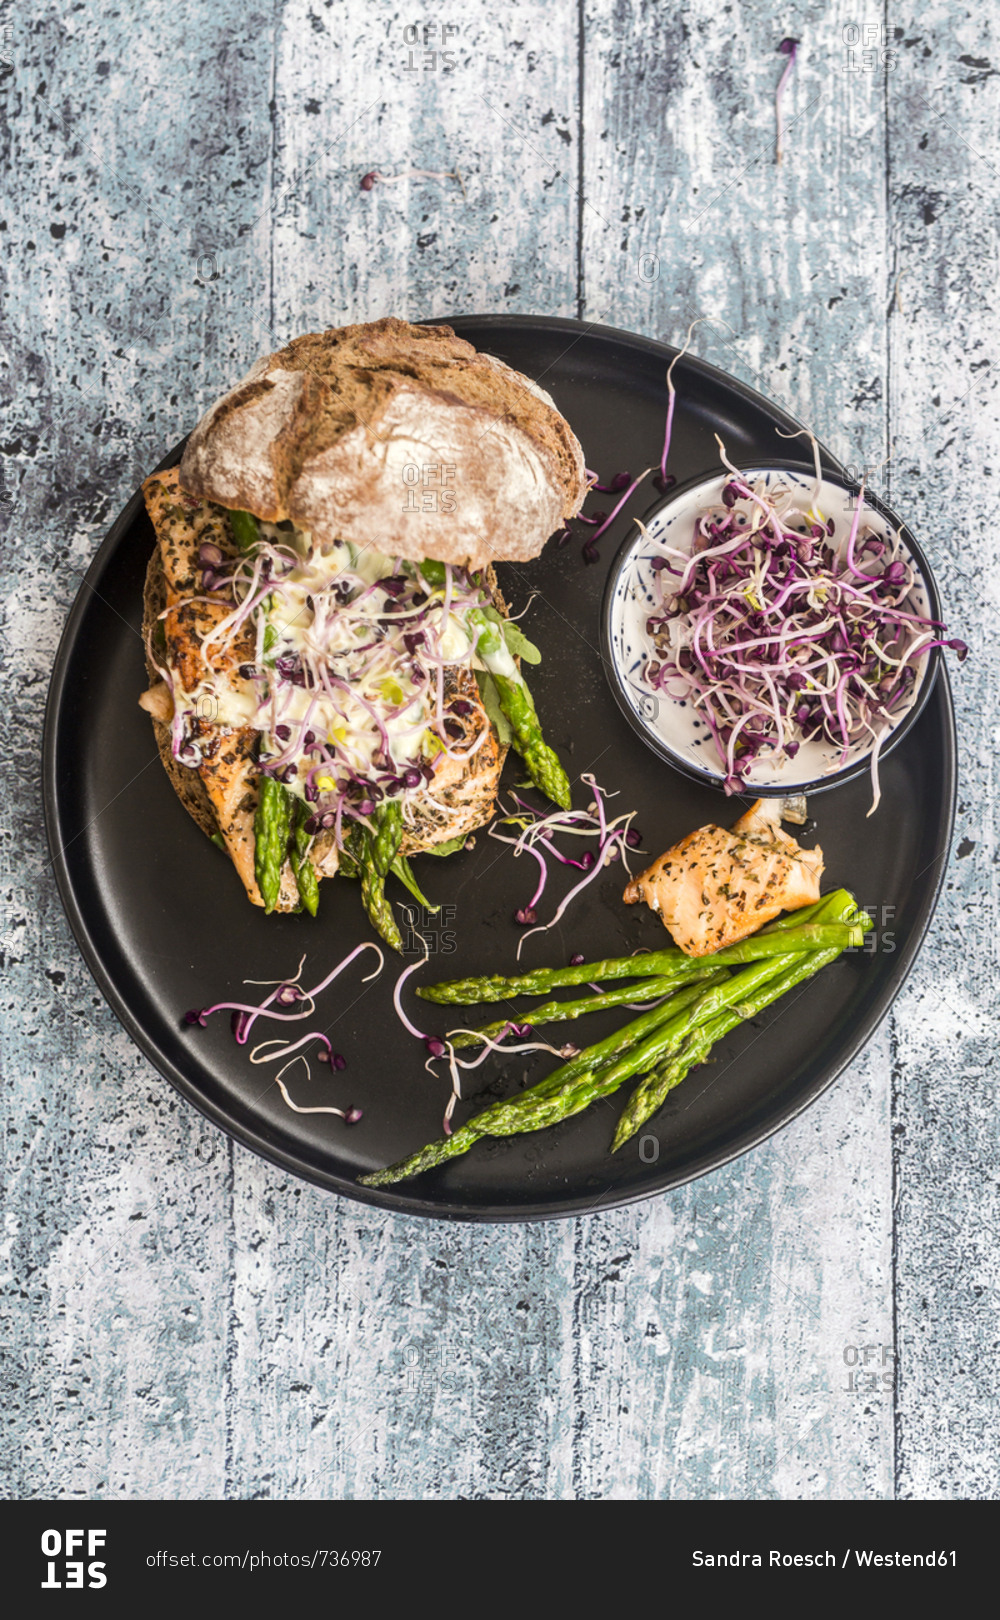 Salmon burger with green asparagus and red cress on plate
stock photo - OFFSET